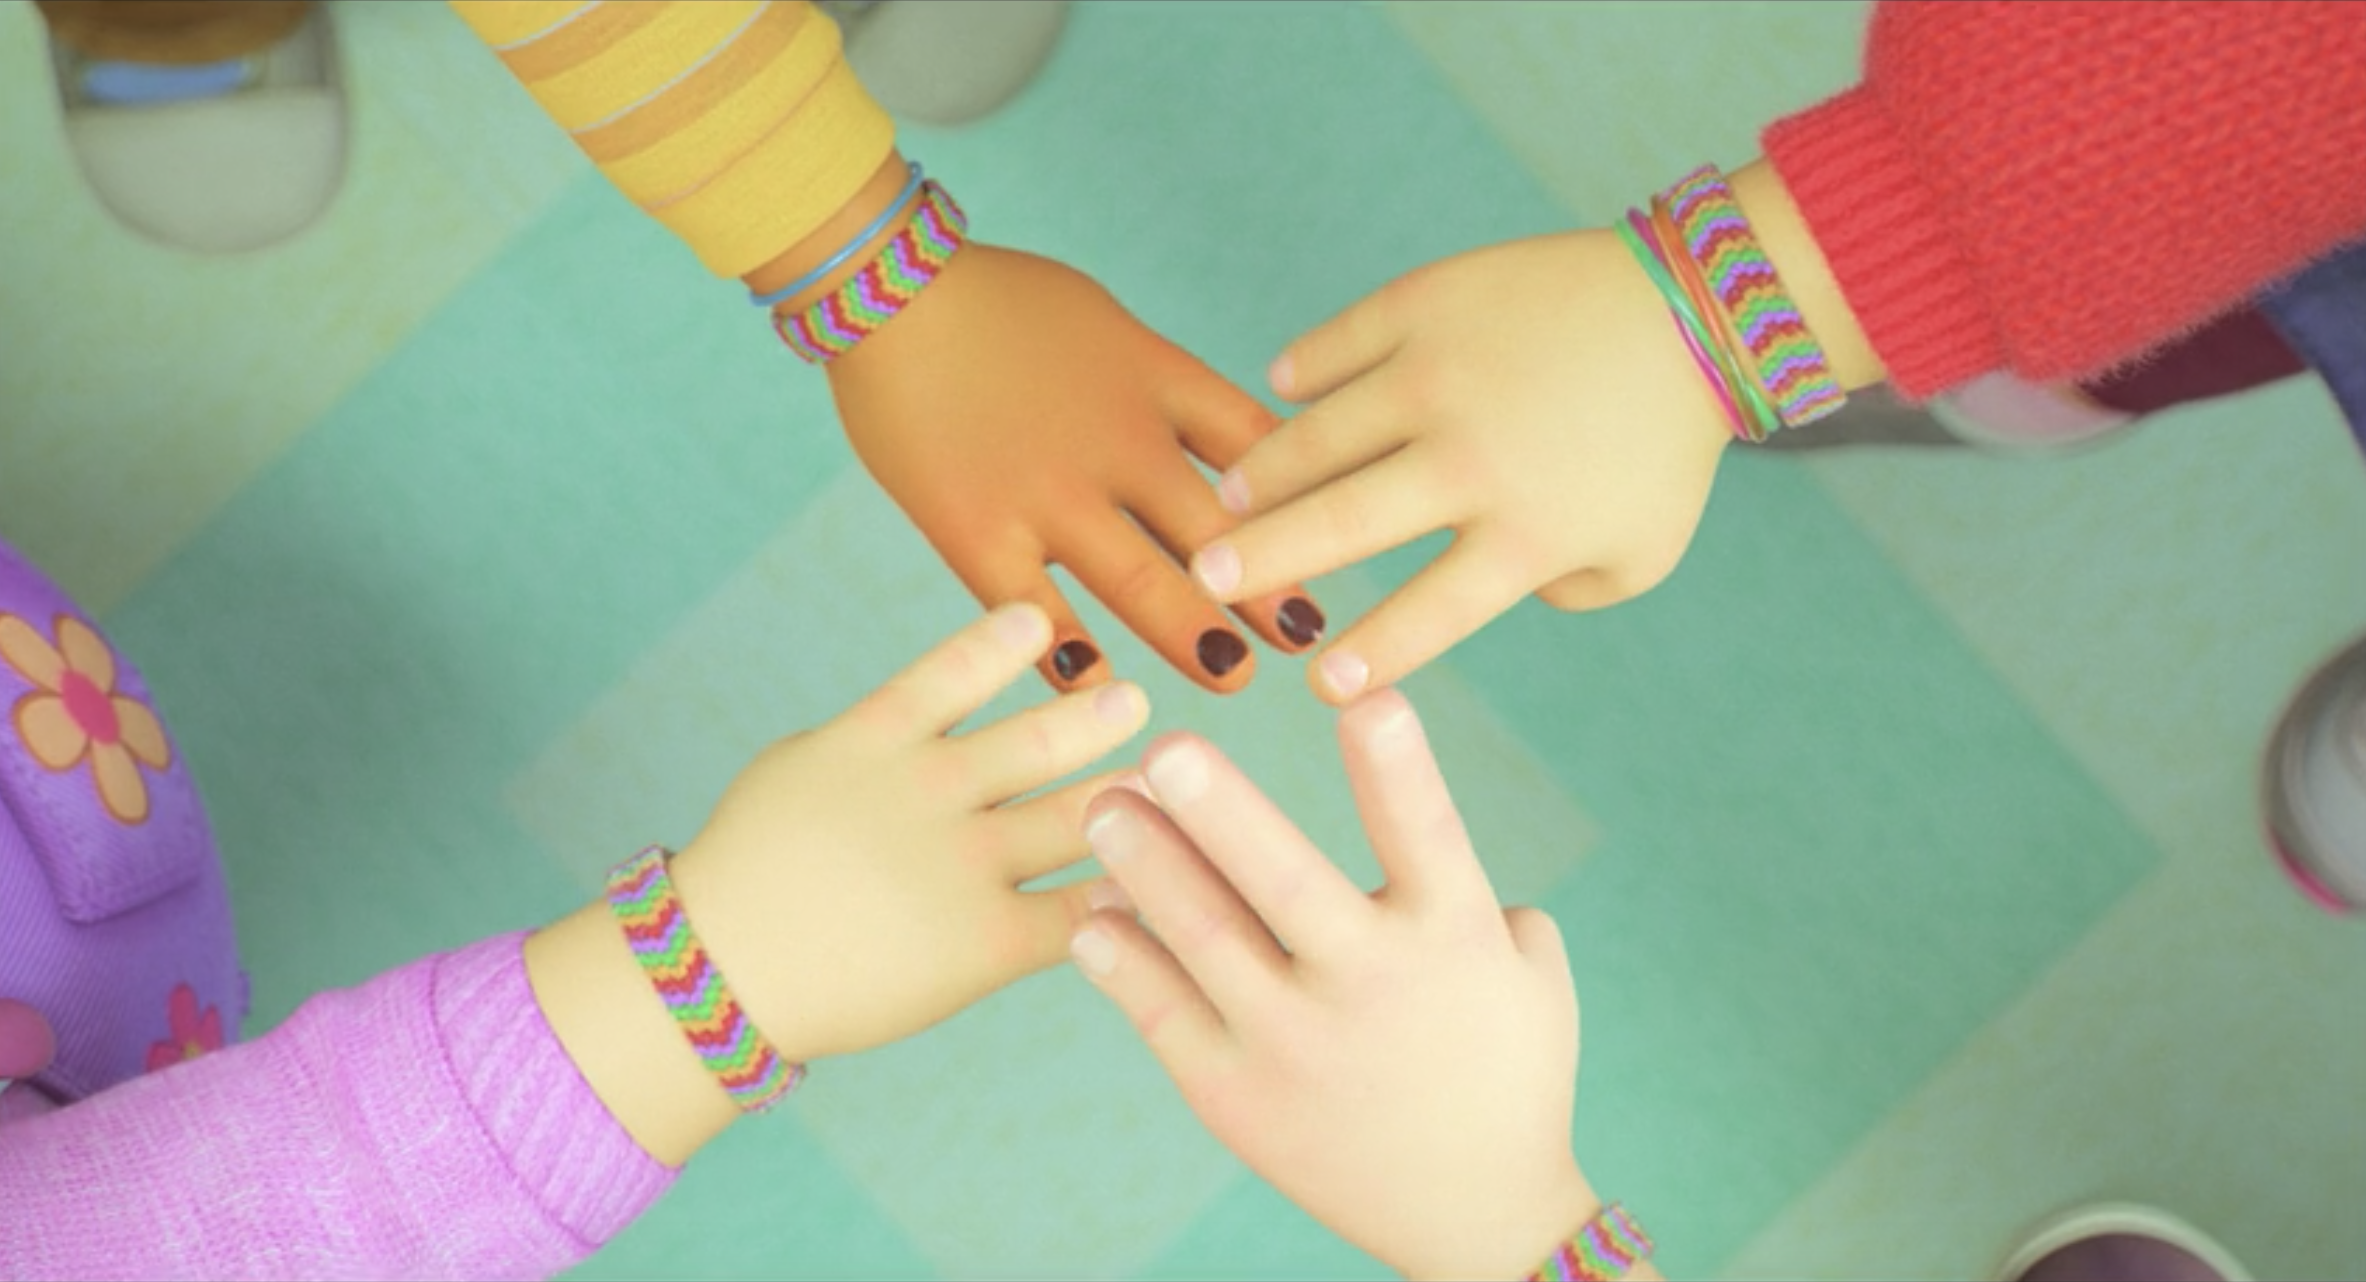 The characters&#x27; hands touching, showing their matching friendship bracelets